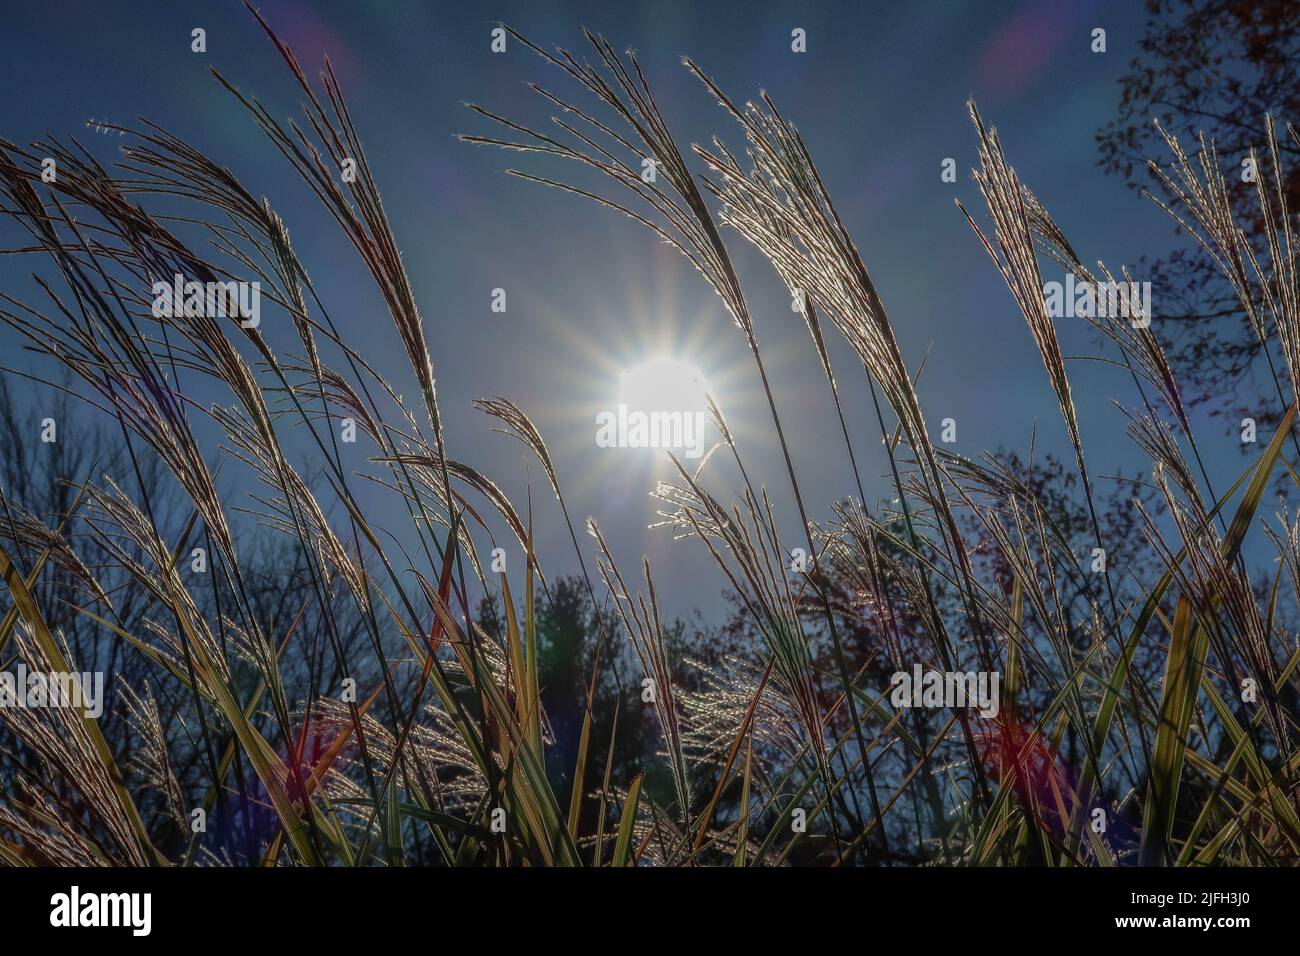 The long fluffy plants against the shining sun Stock Photo